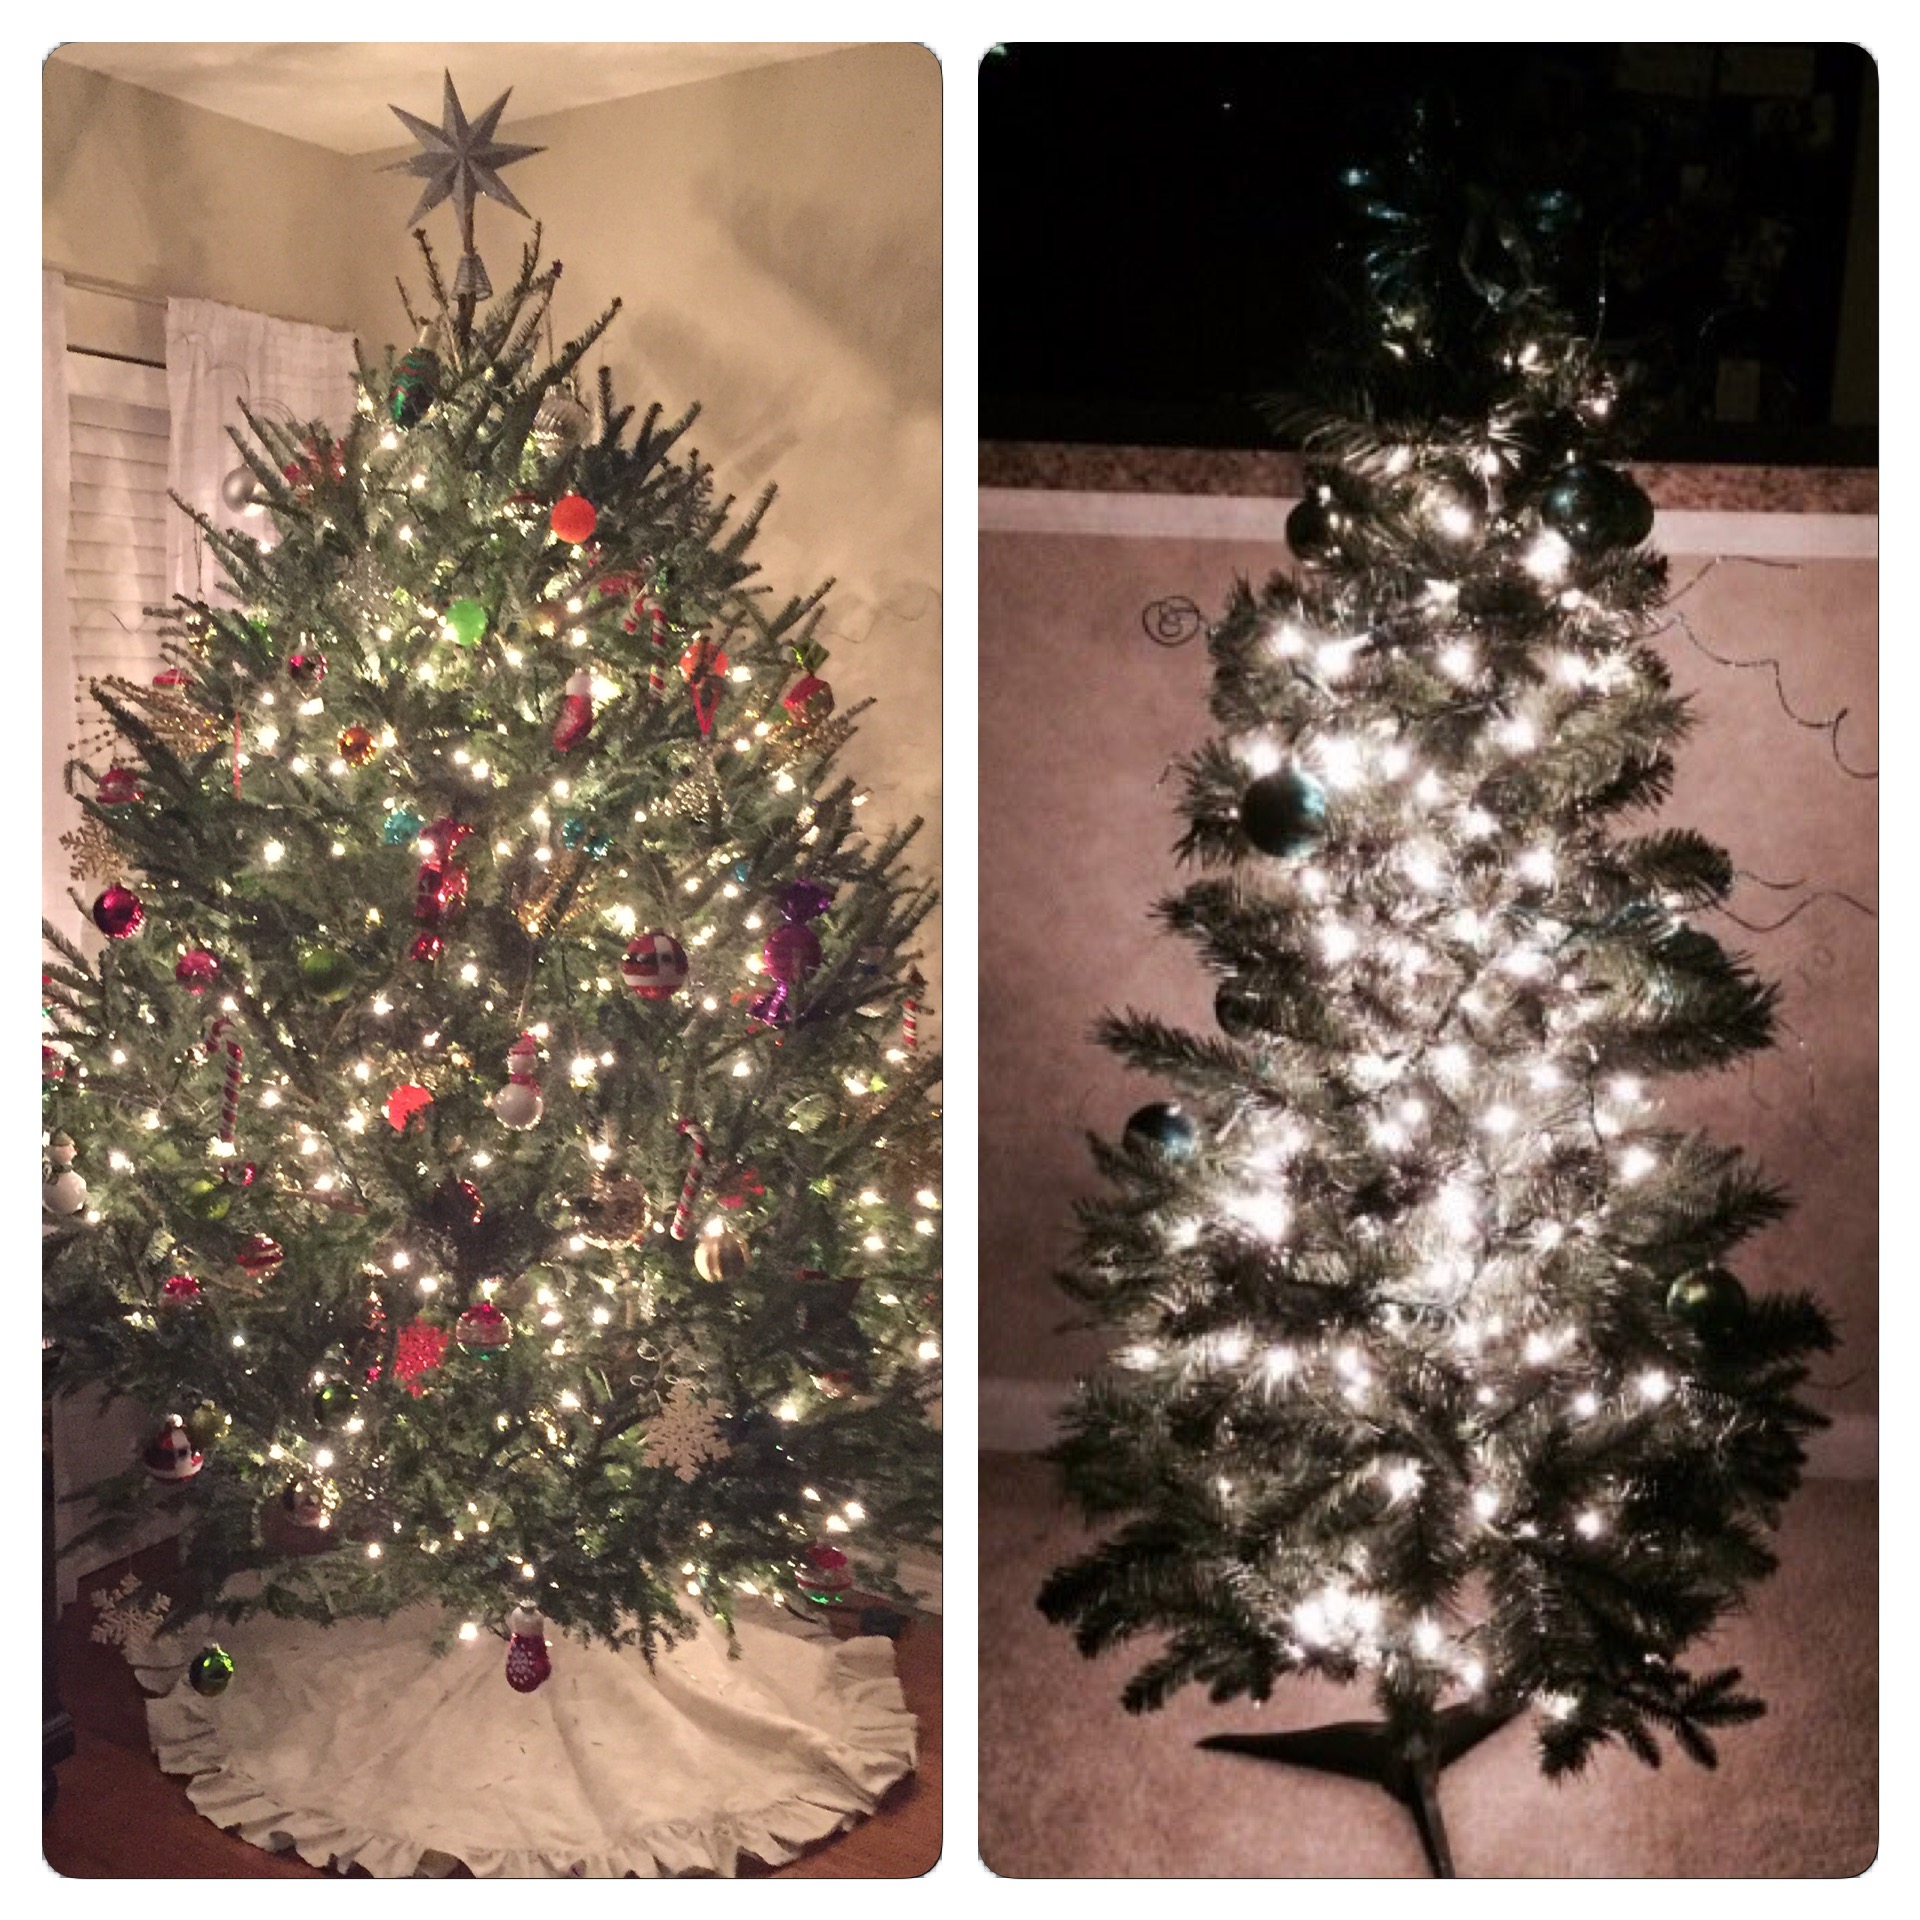 Sid's tree is on the left and my tree is on the right.